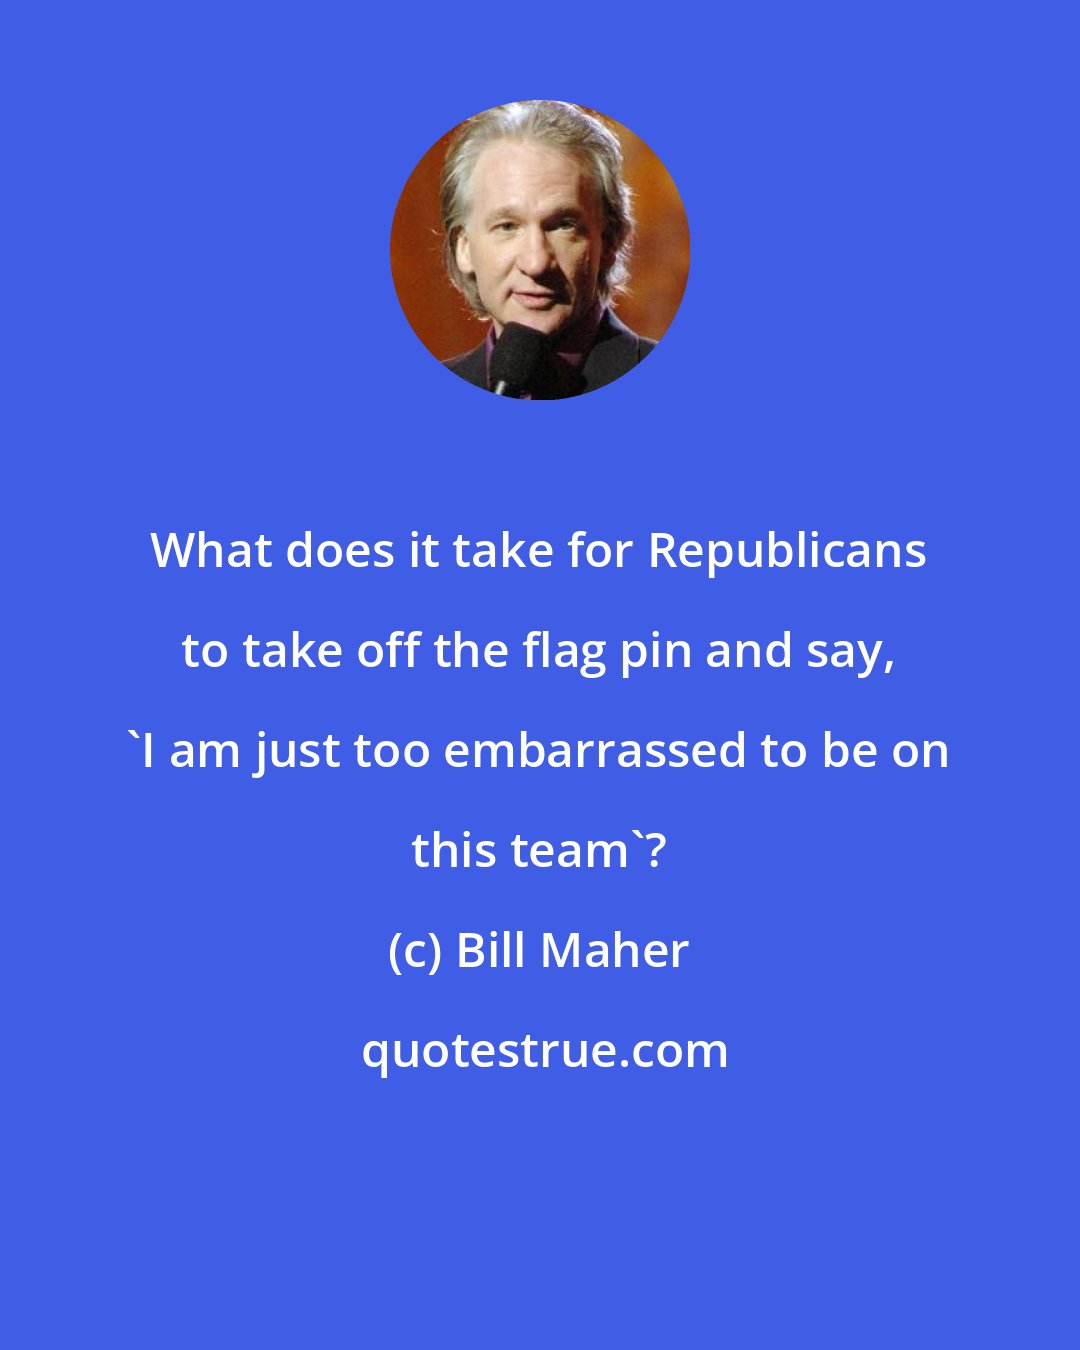 Bill Maher: What does it take for Republicans to take off the flag pin and say, 'I am just too embarrassed to be on this team'?